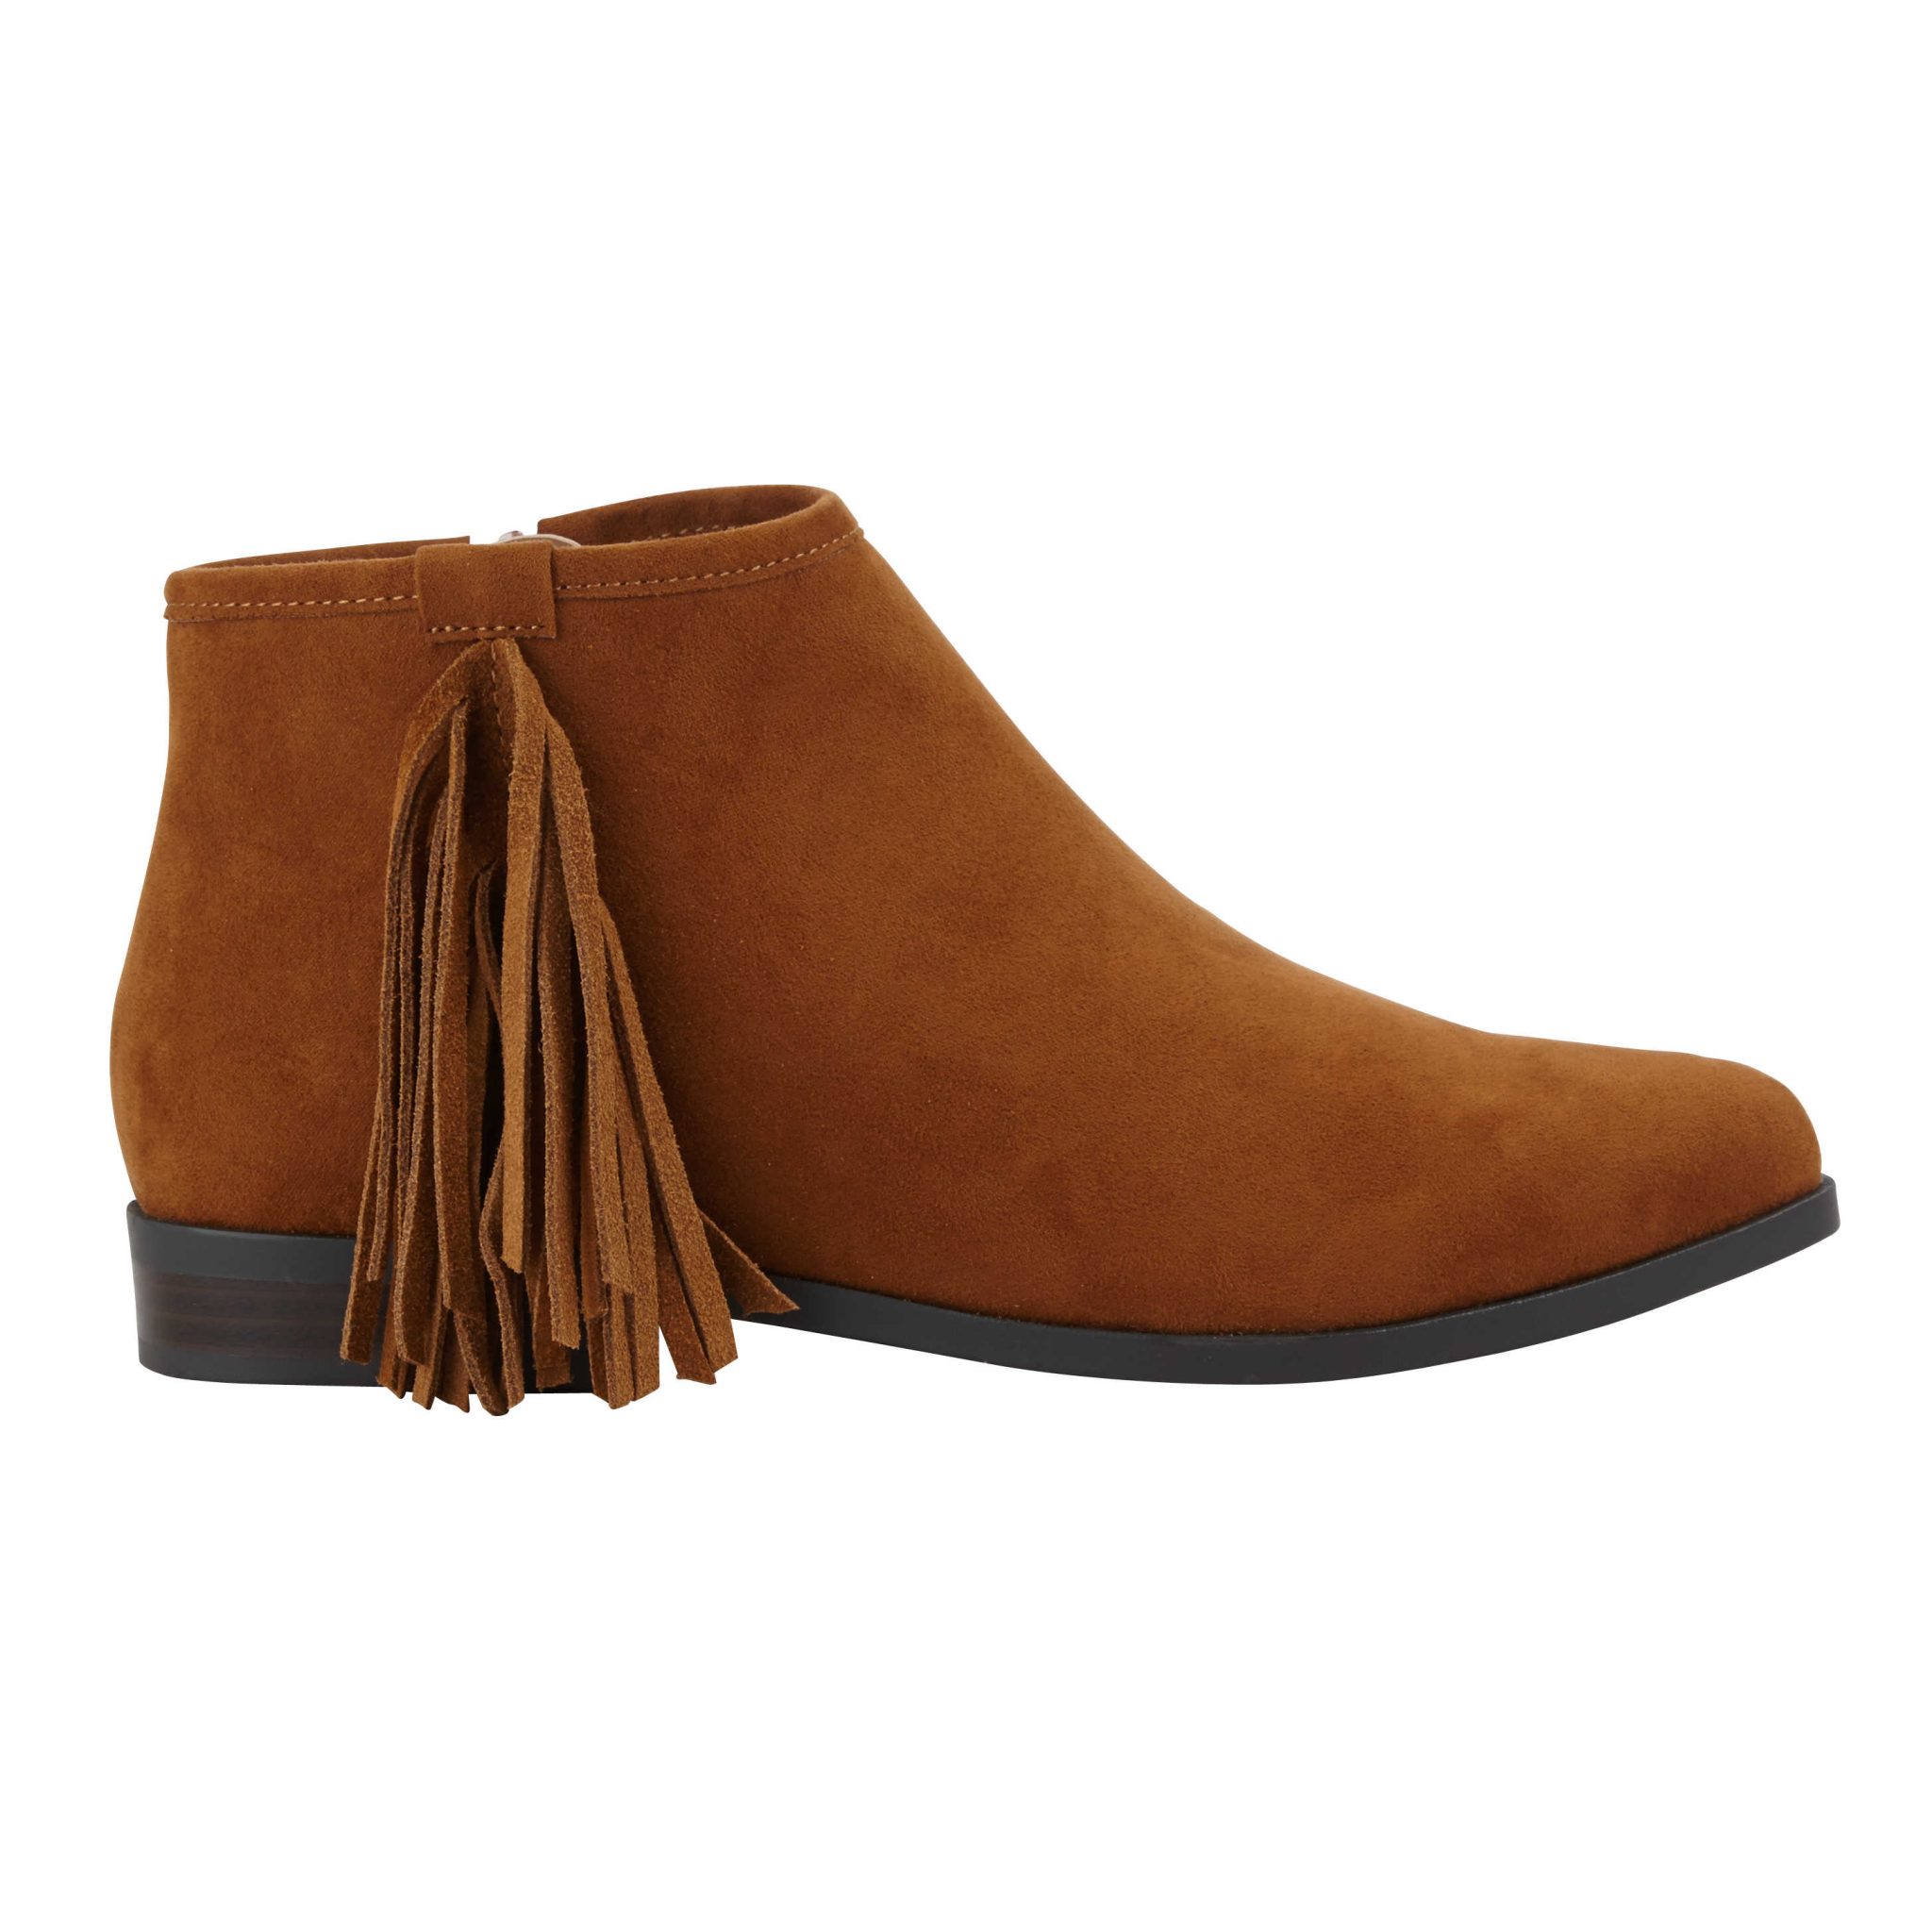 Tan Fringe Western Ankle Boot £25.00